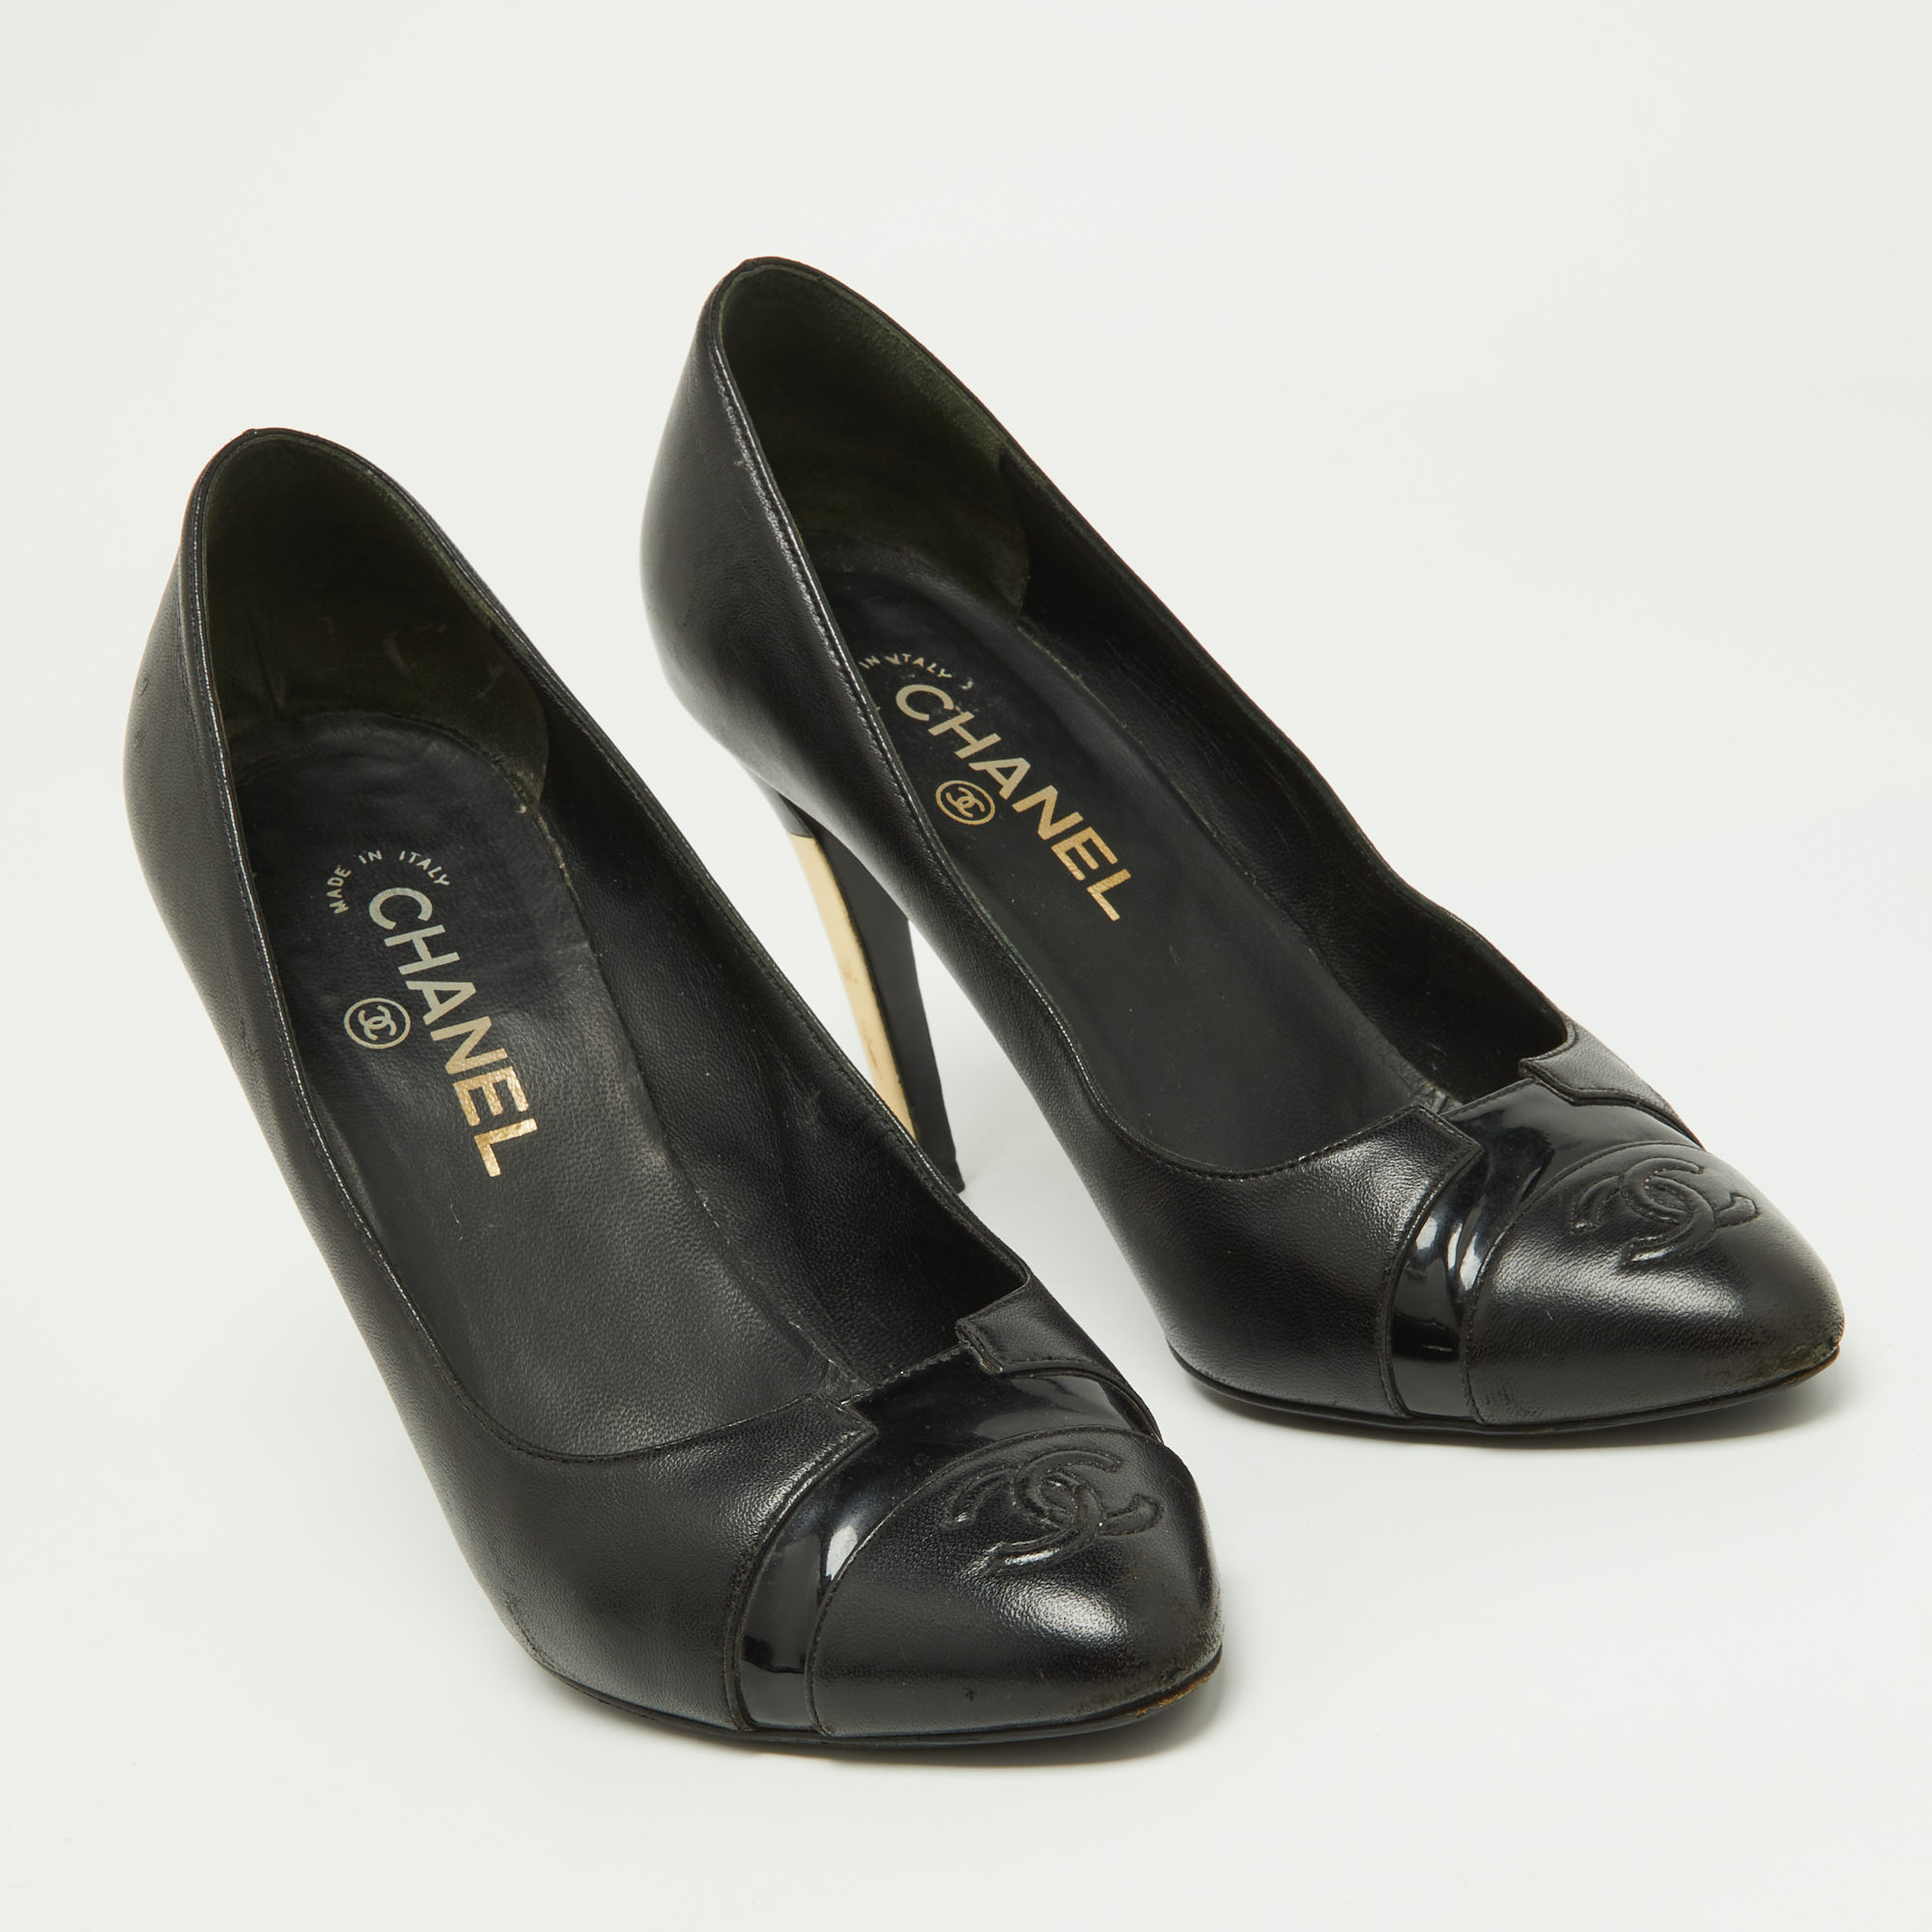 Chanel Black/Gold Patent And Leather CC Cap Toe Pumps Size 39.5